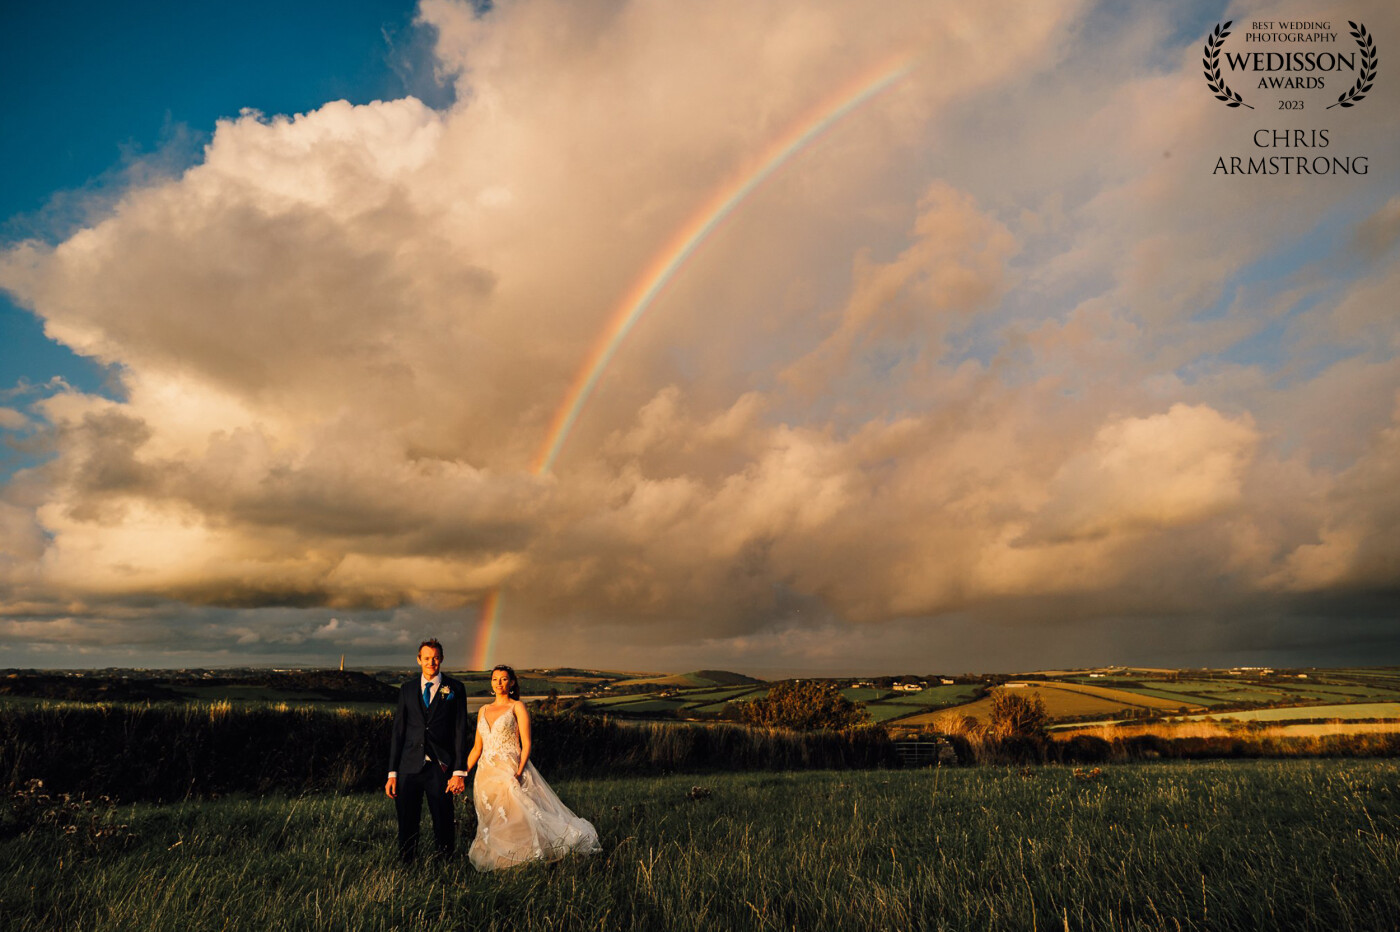 The good thing about rain on your wedding day, is that it often means rainbows!